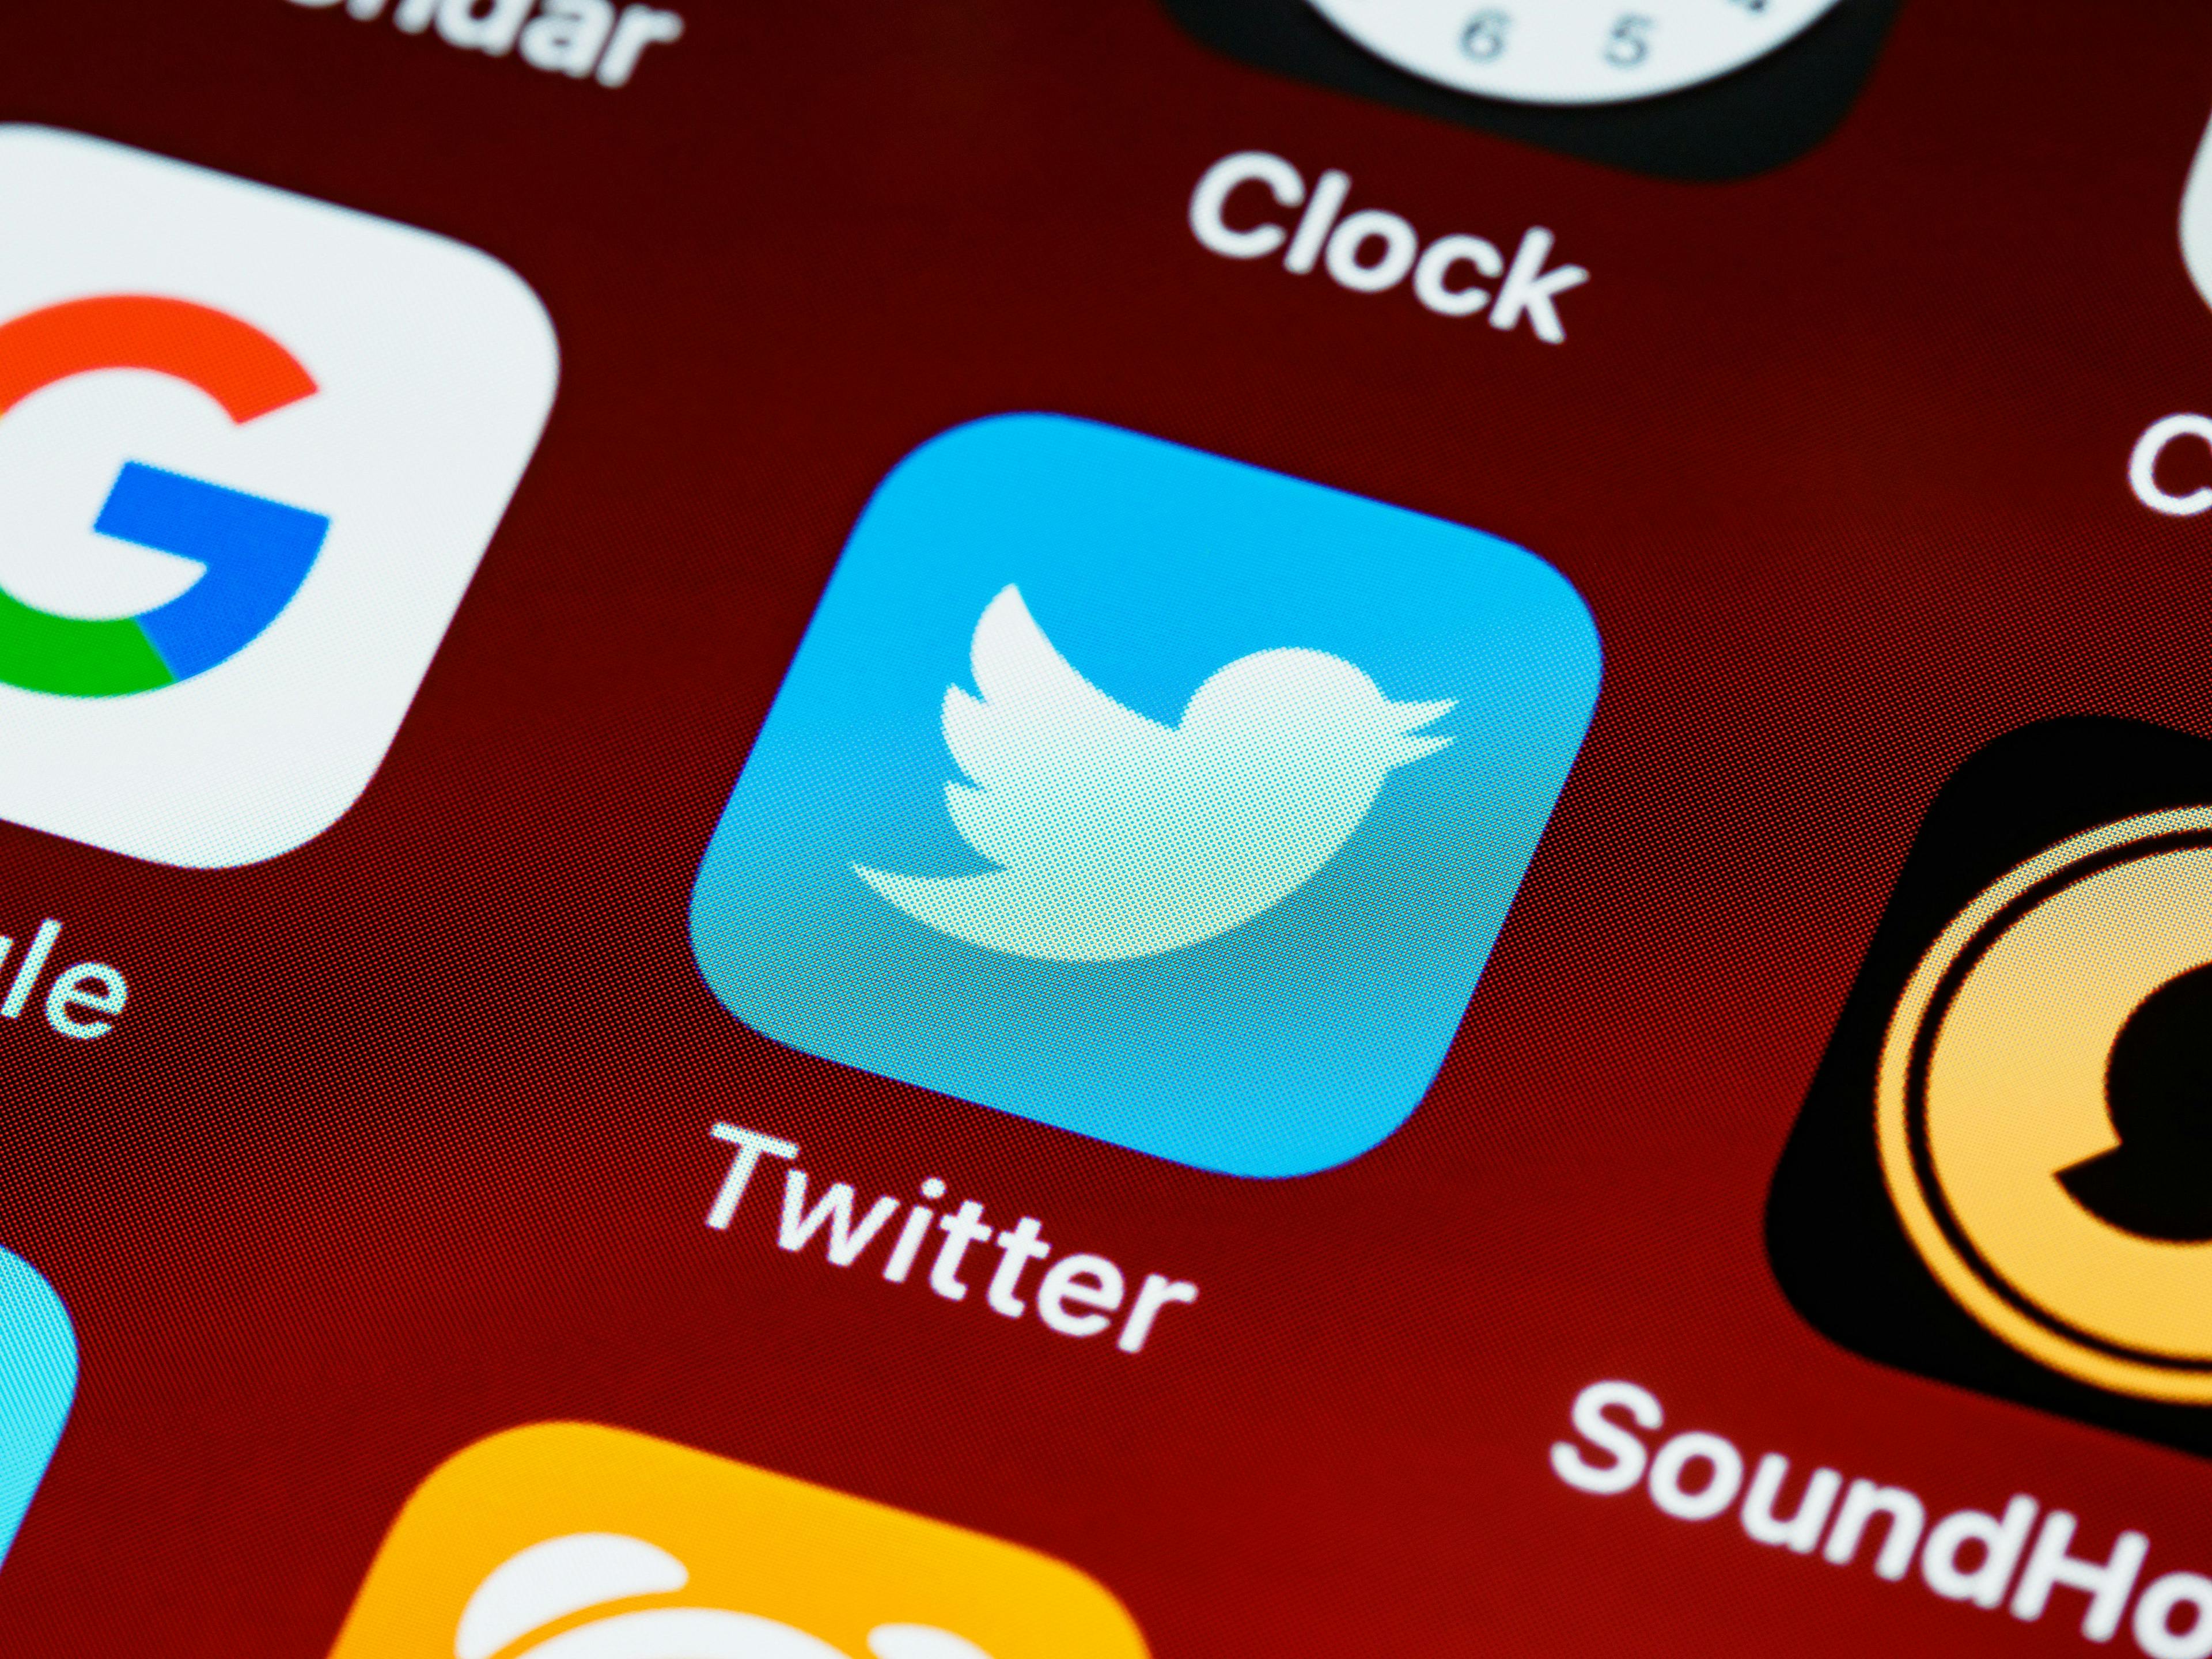 Twitter could be banned in Europe